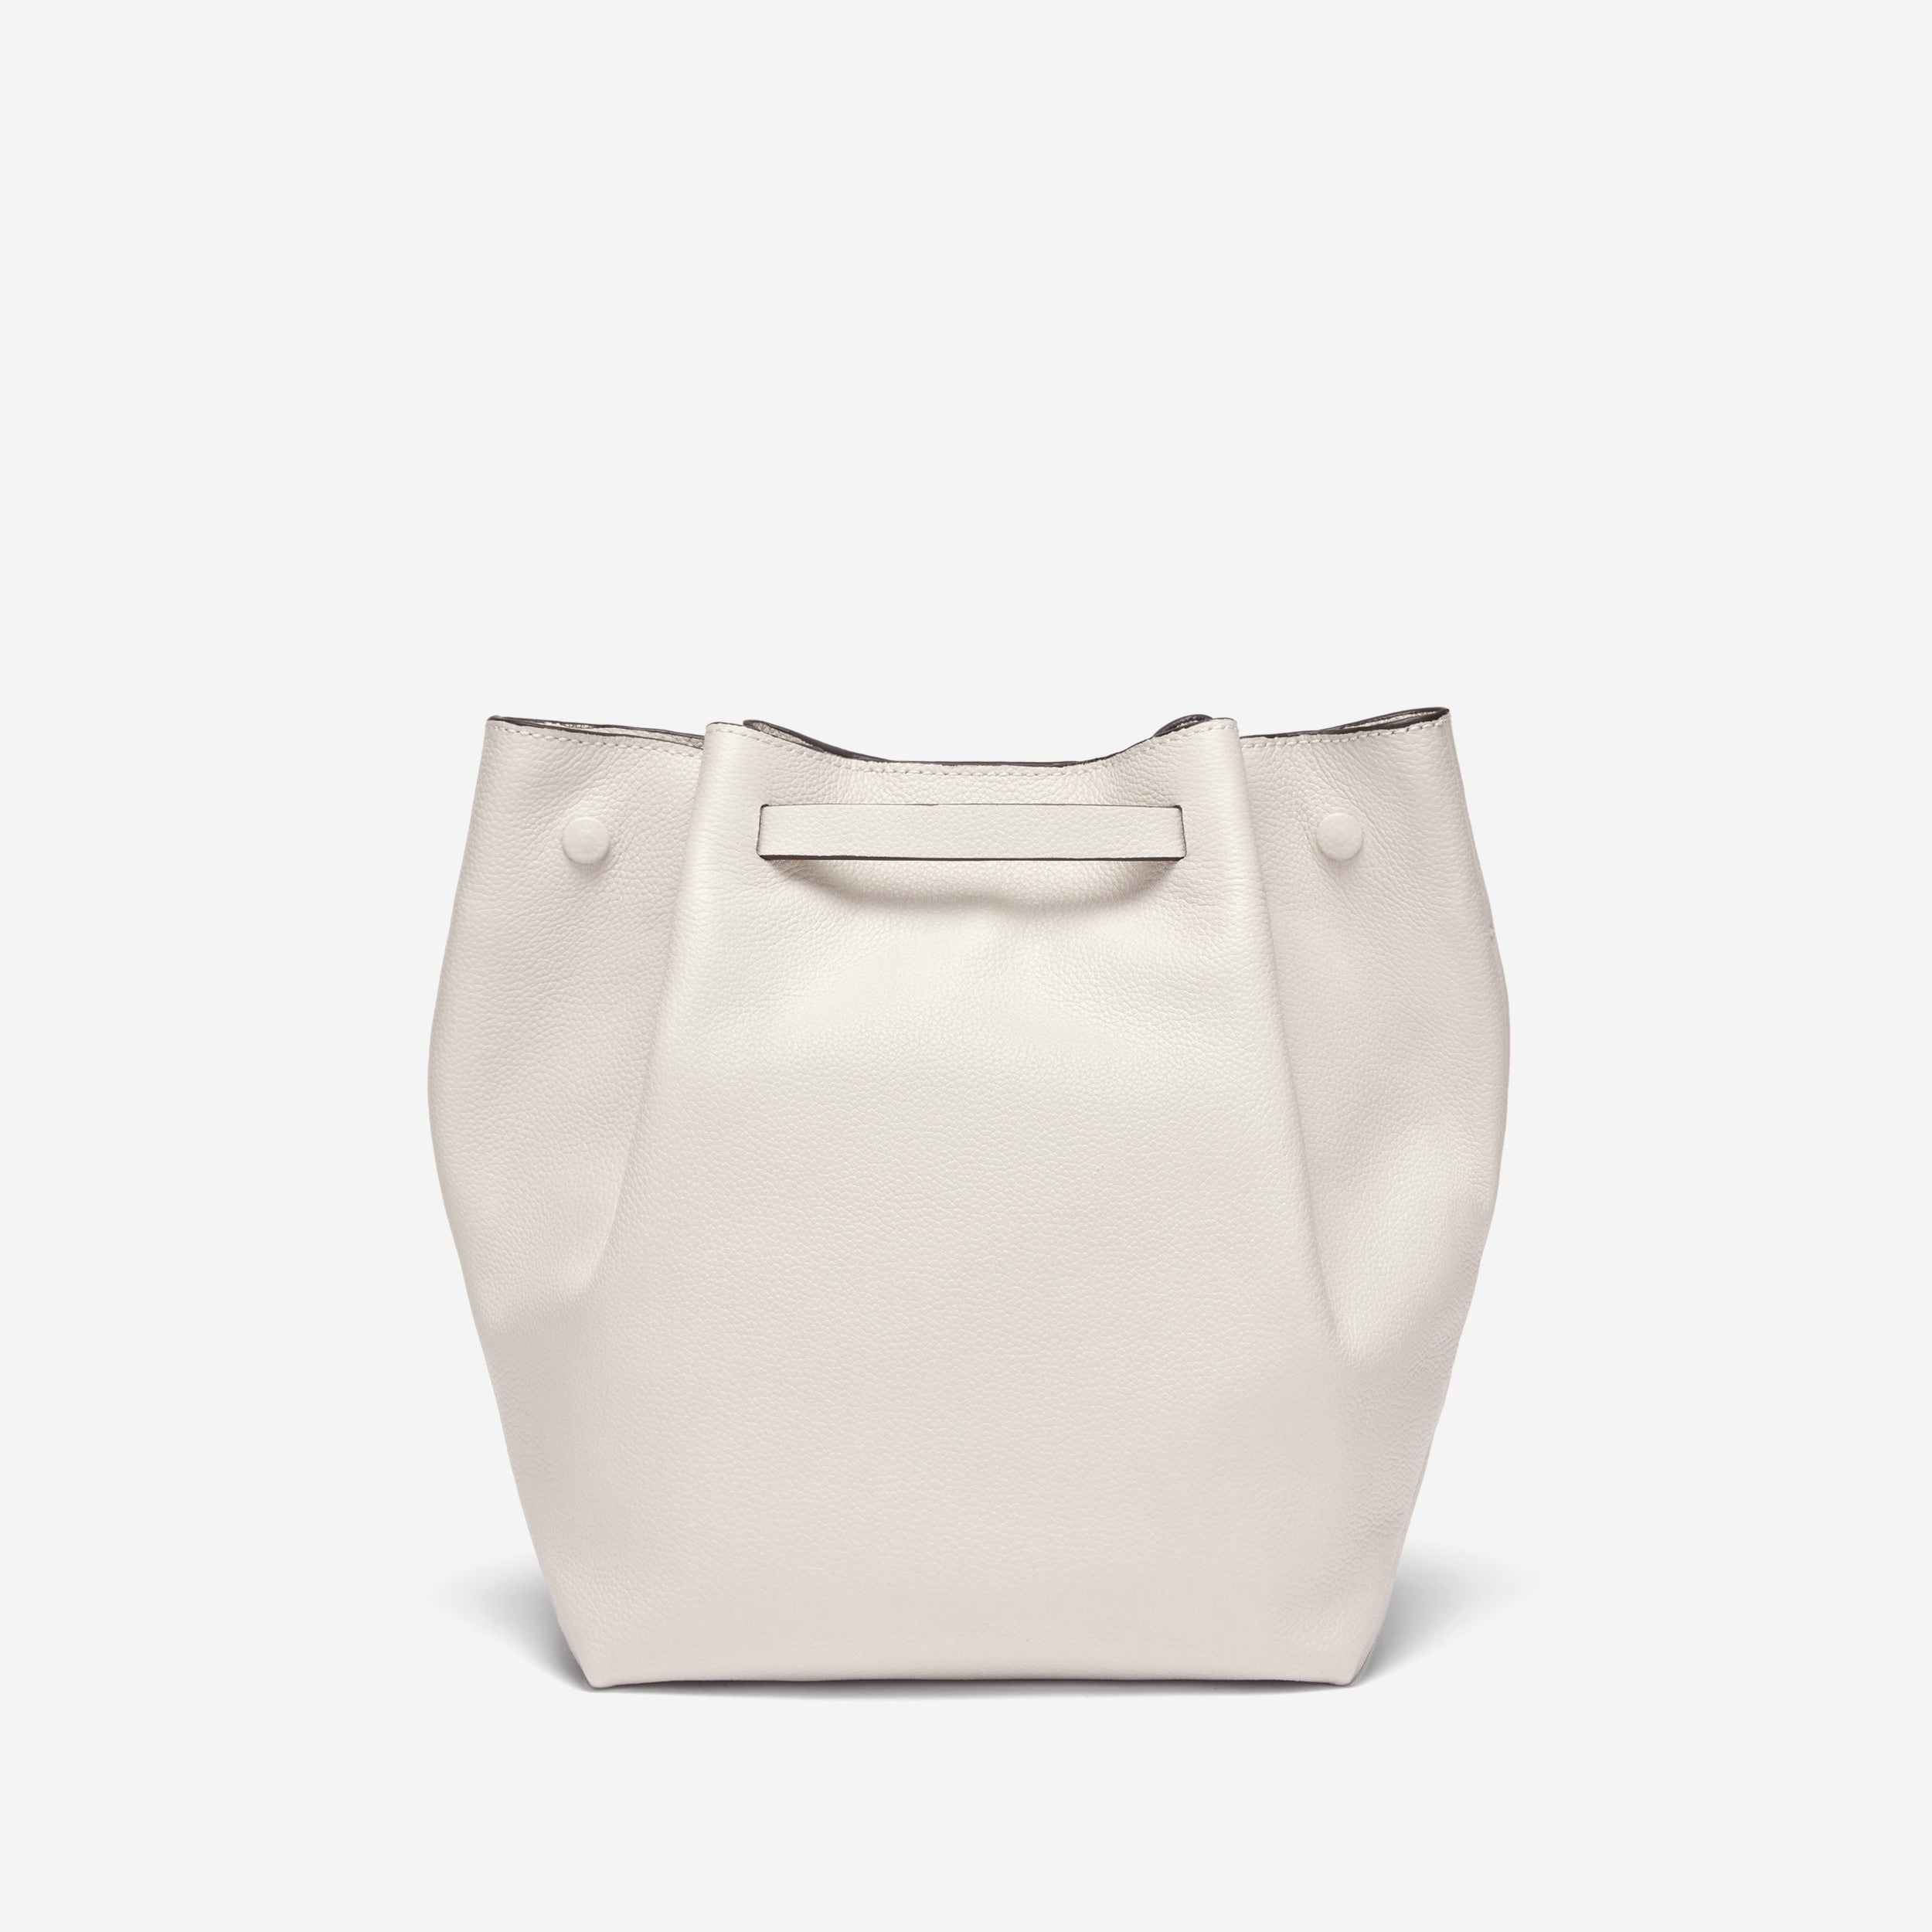 Small Bucket Soft Grain Leather Tote Bag